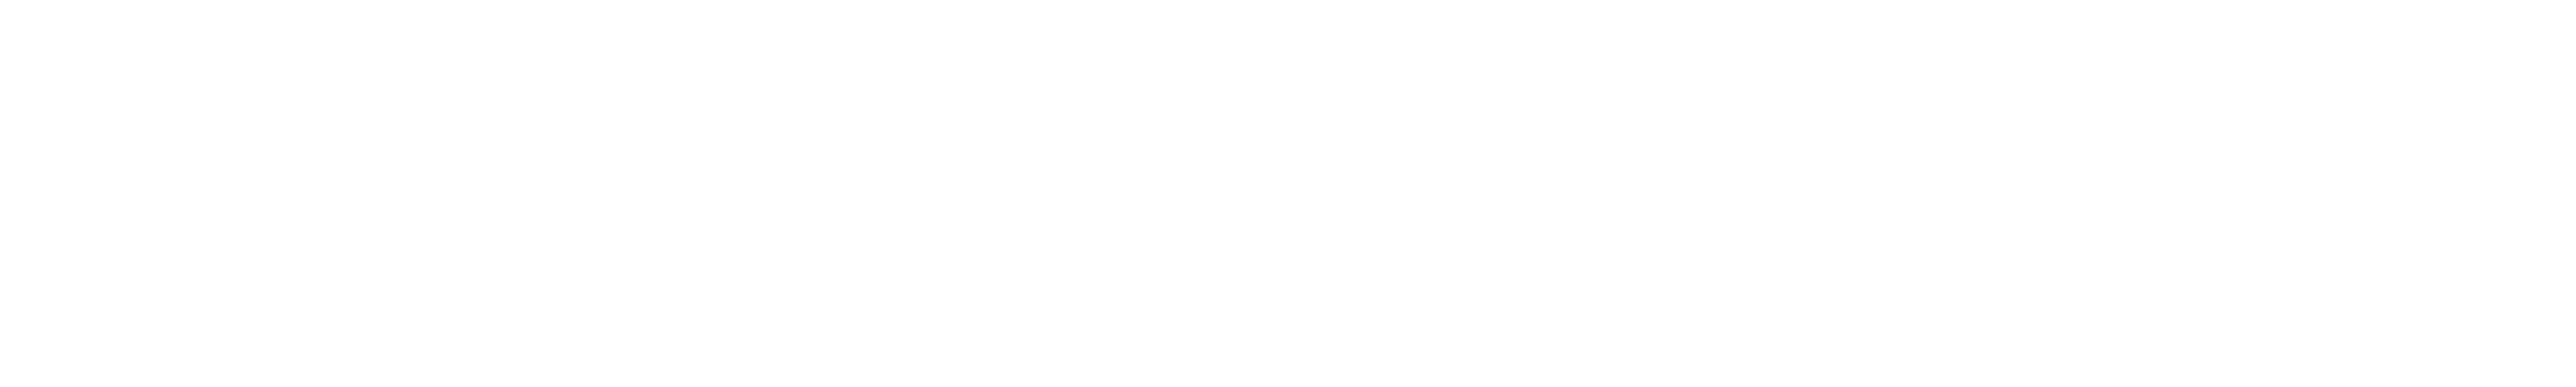 Five Towns College